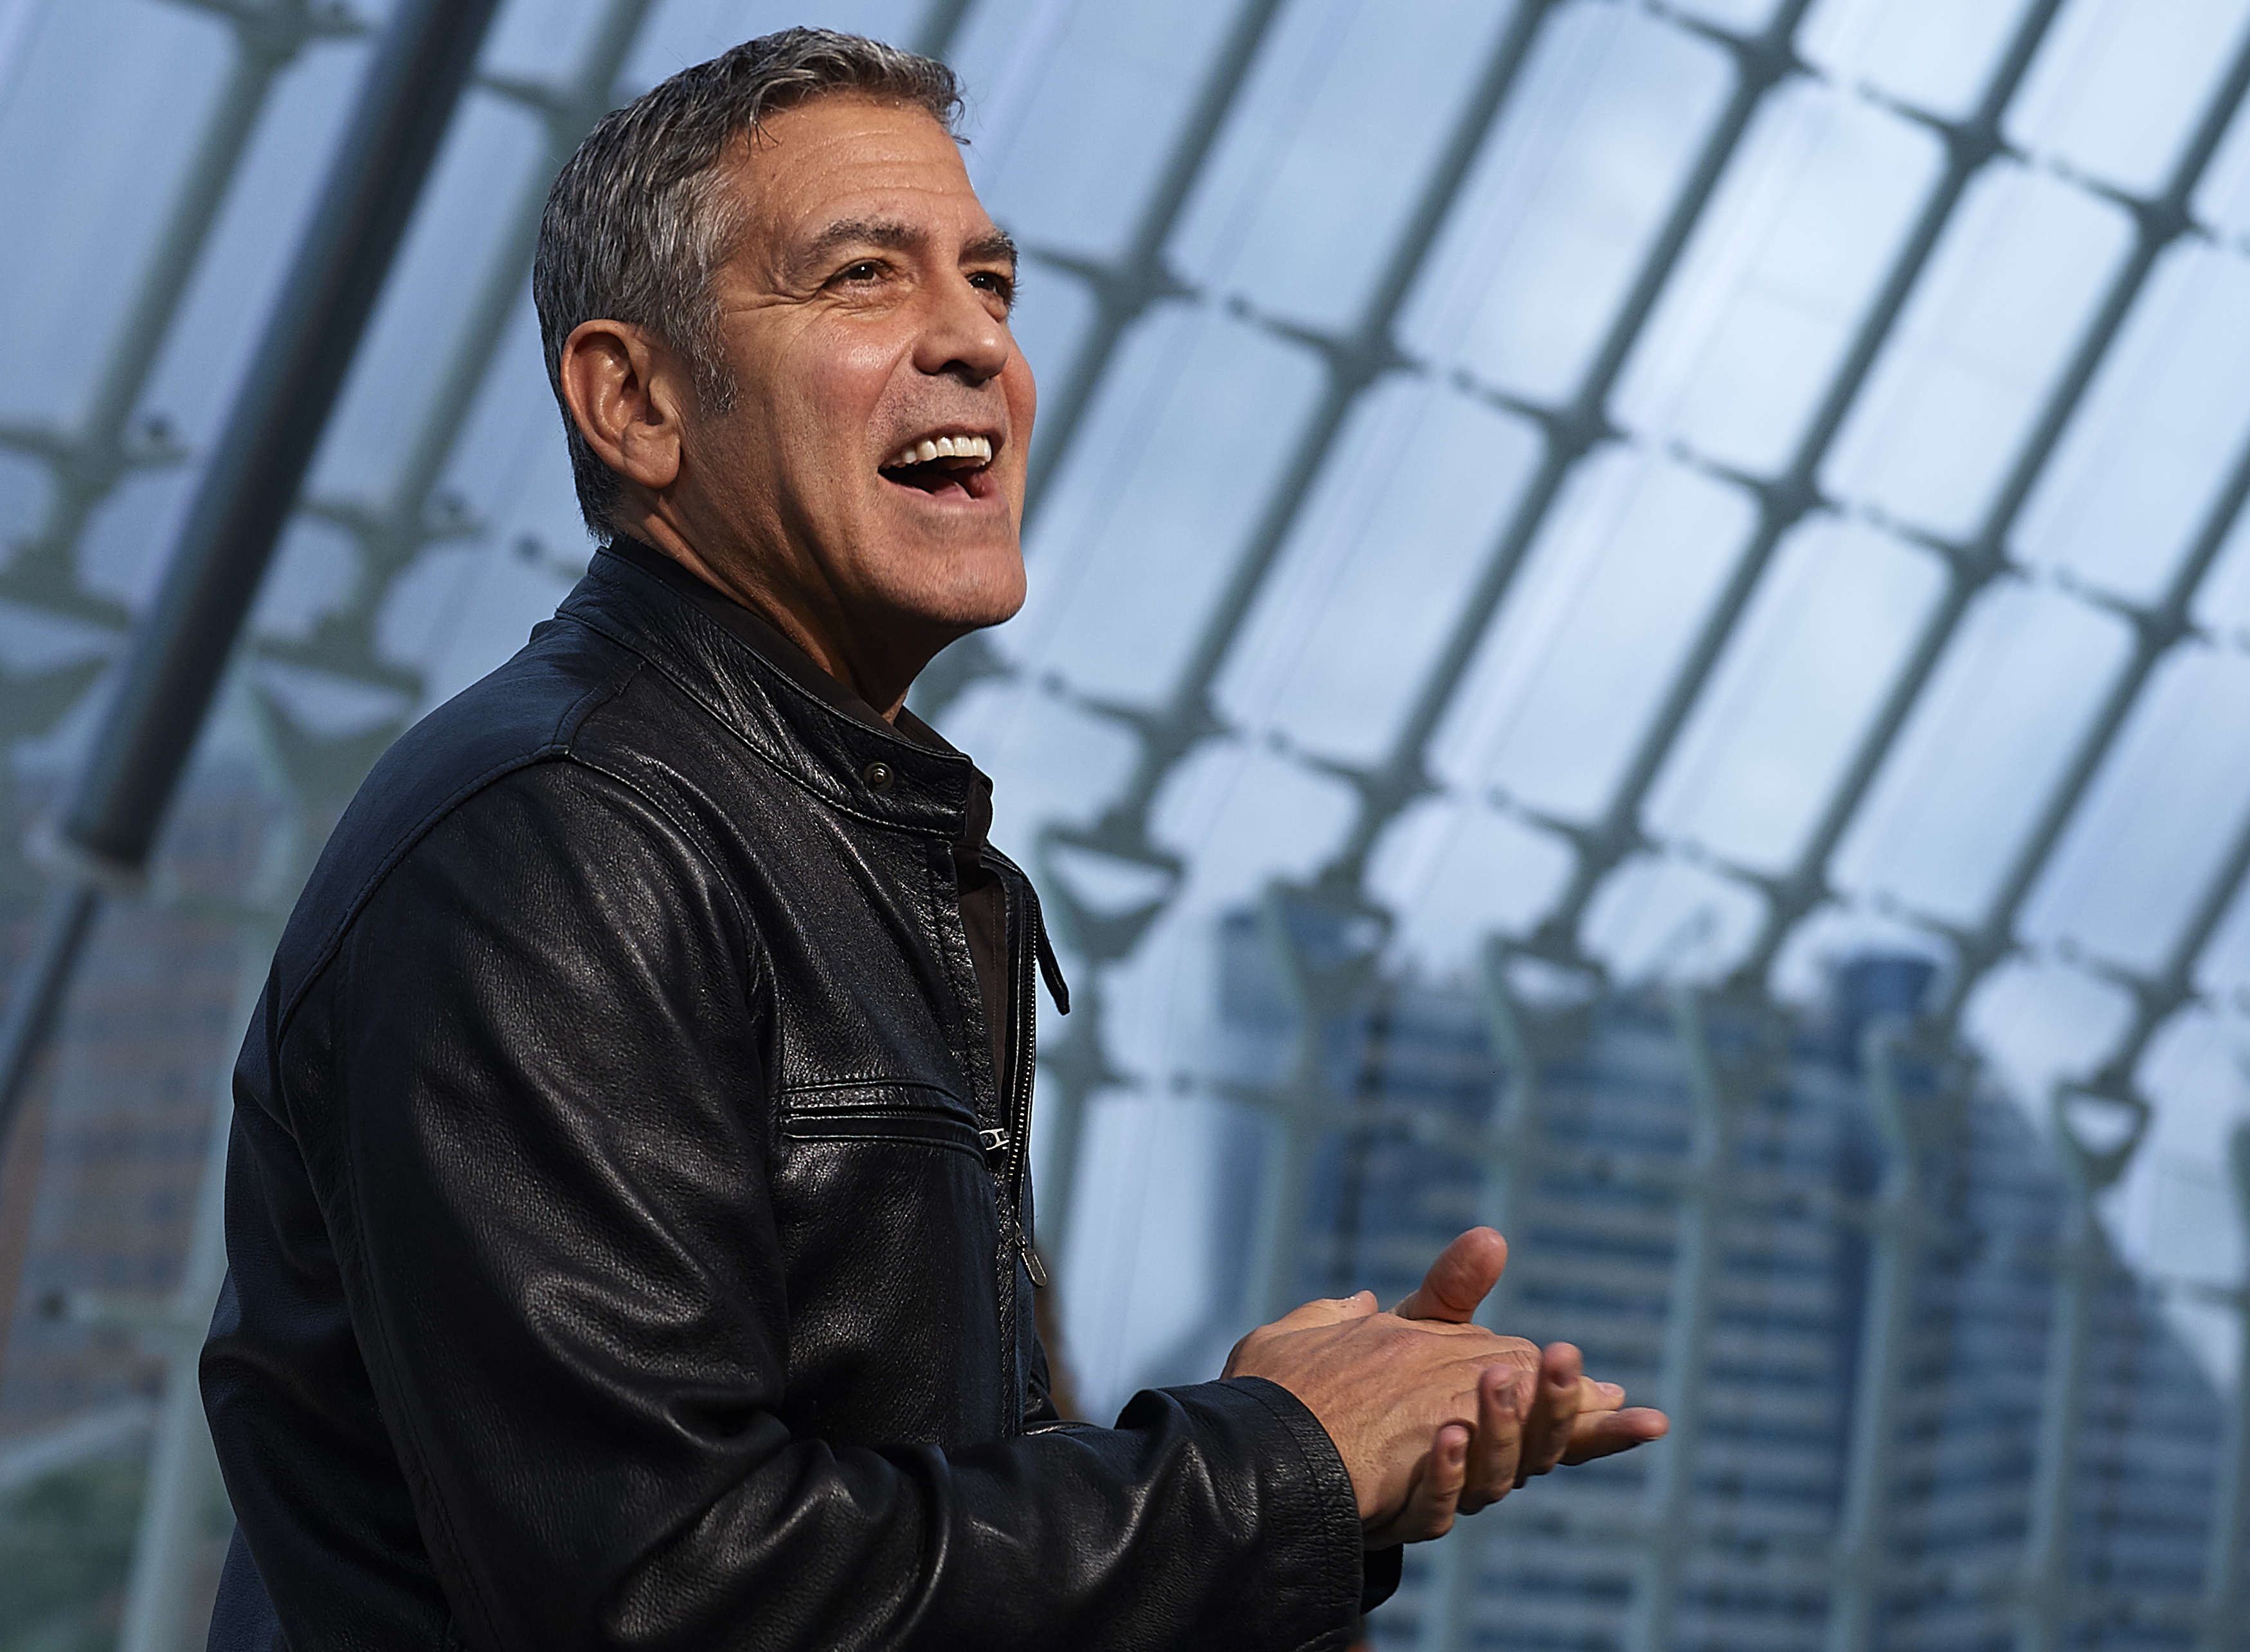 George Clooney Wallpaper Image Photos Pictures Background